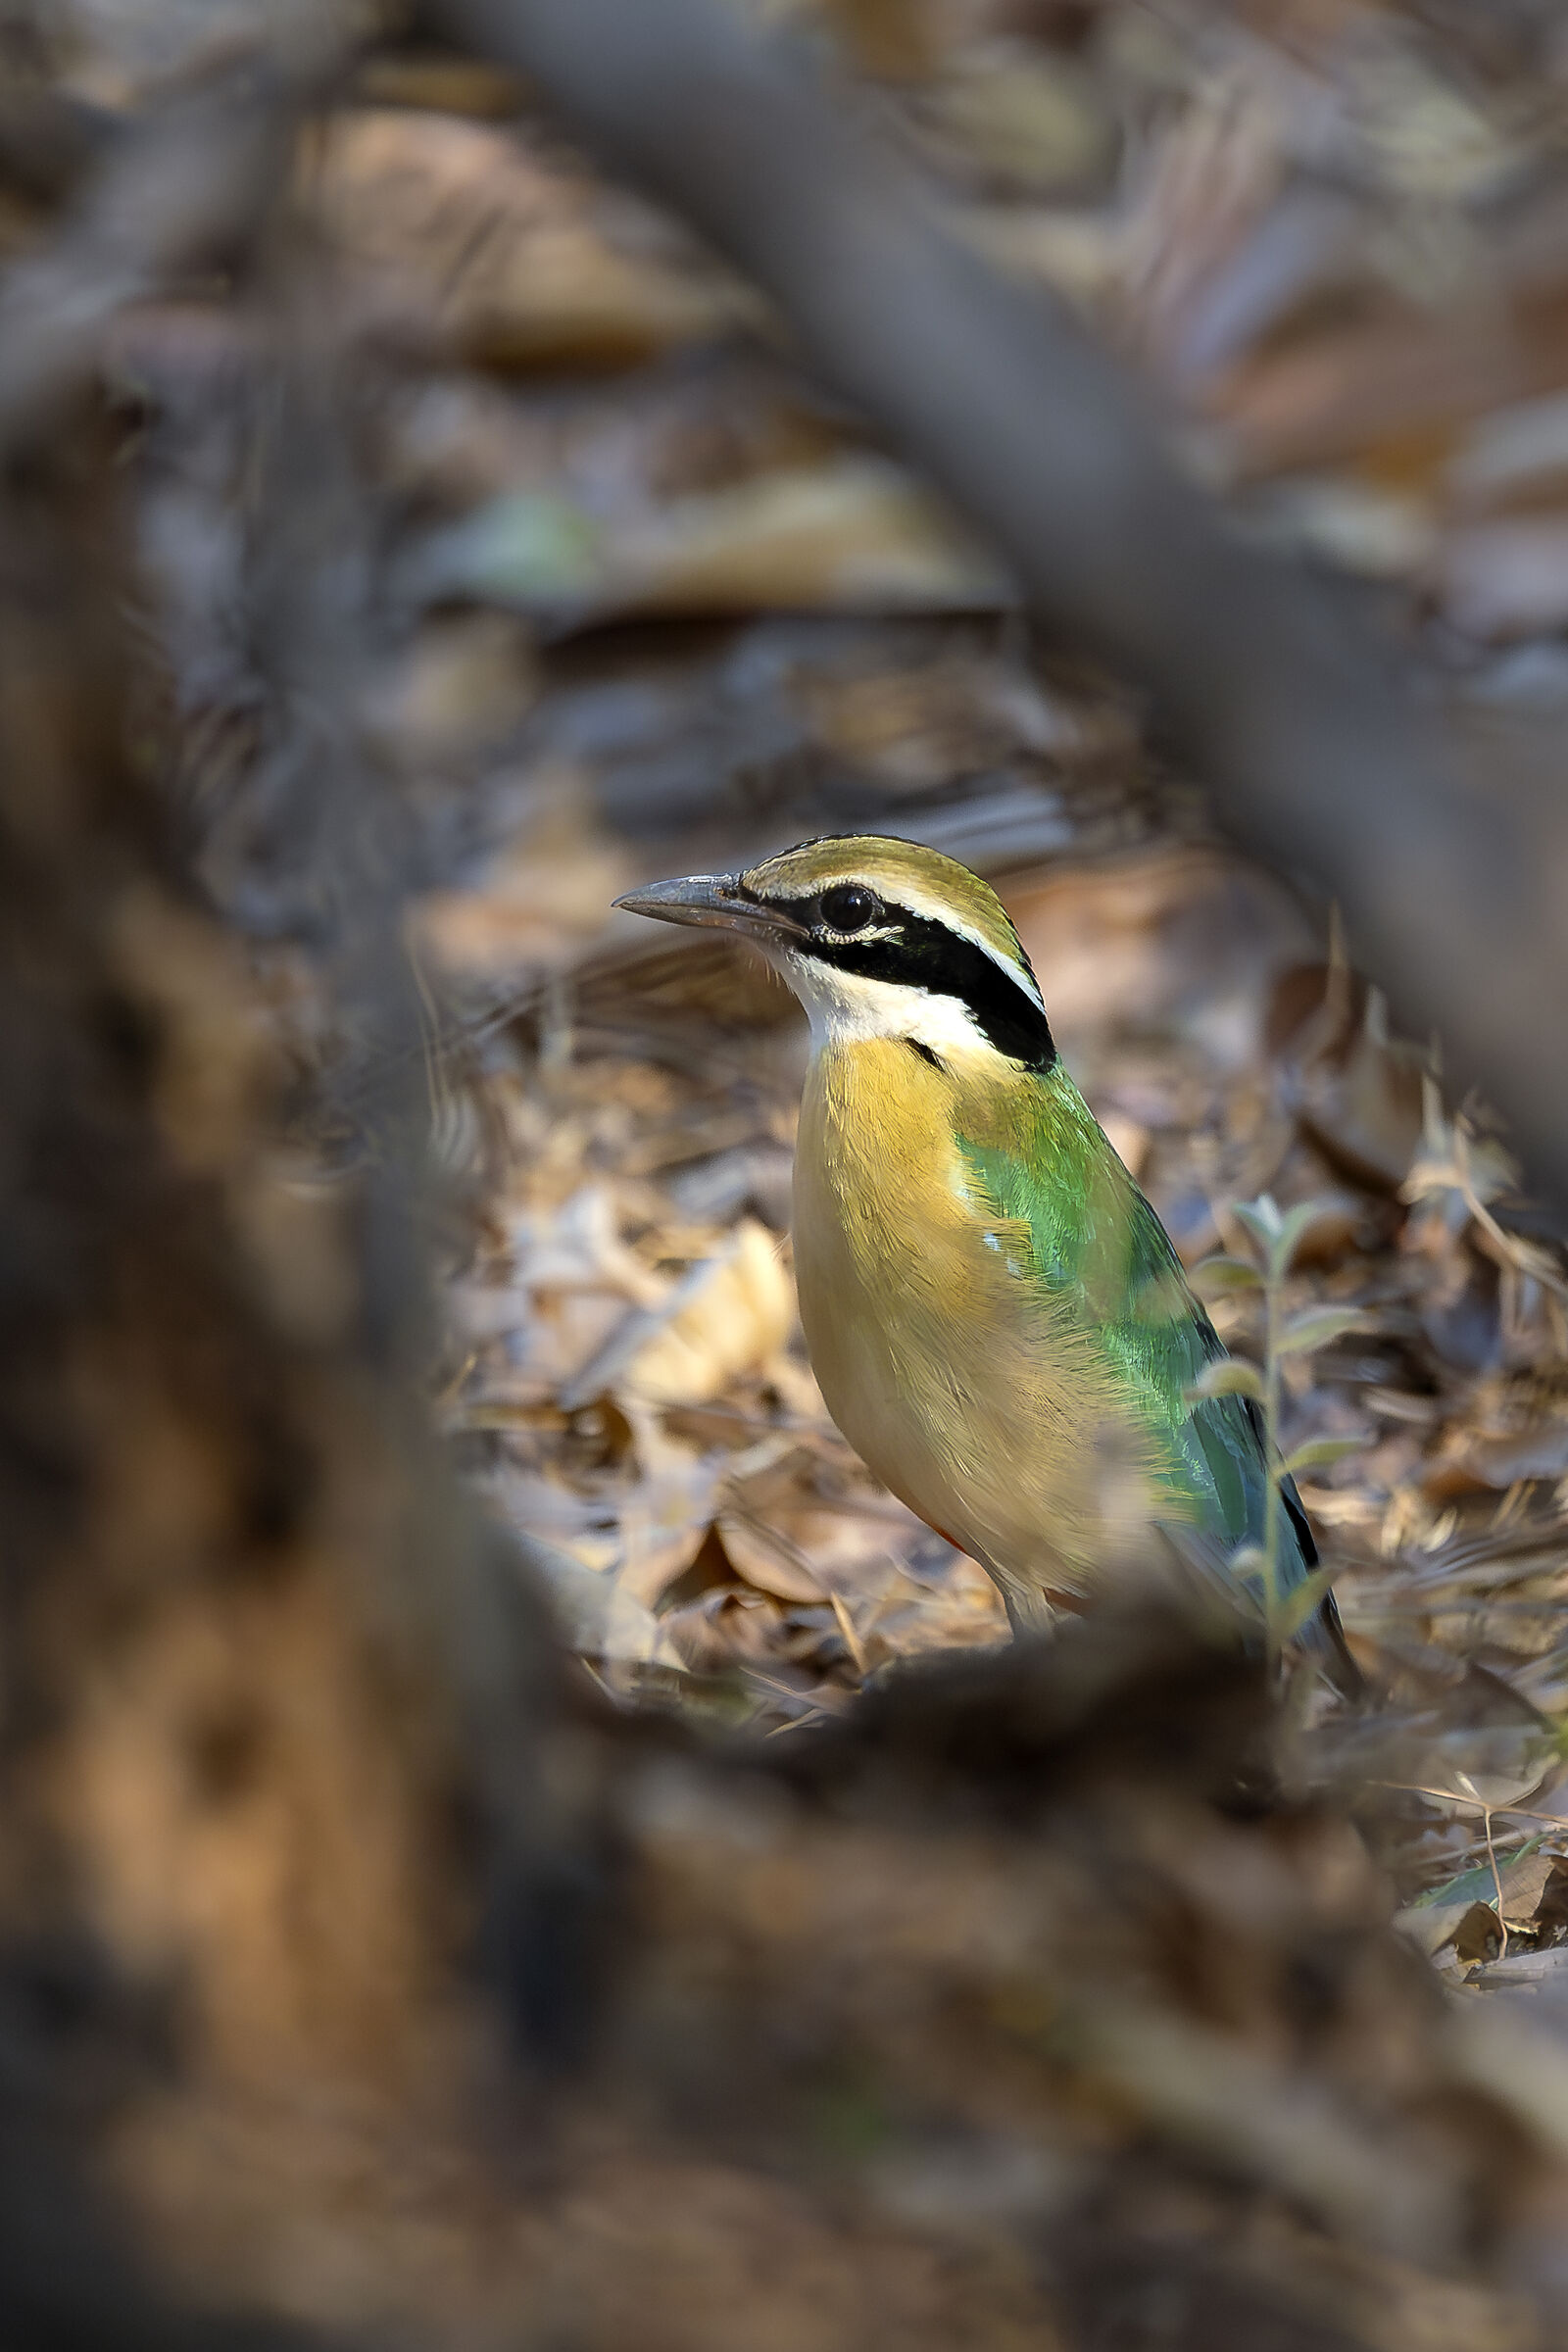 The Indian Pitta...